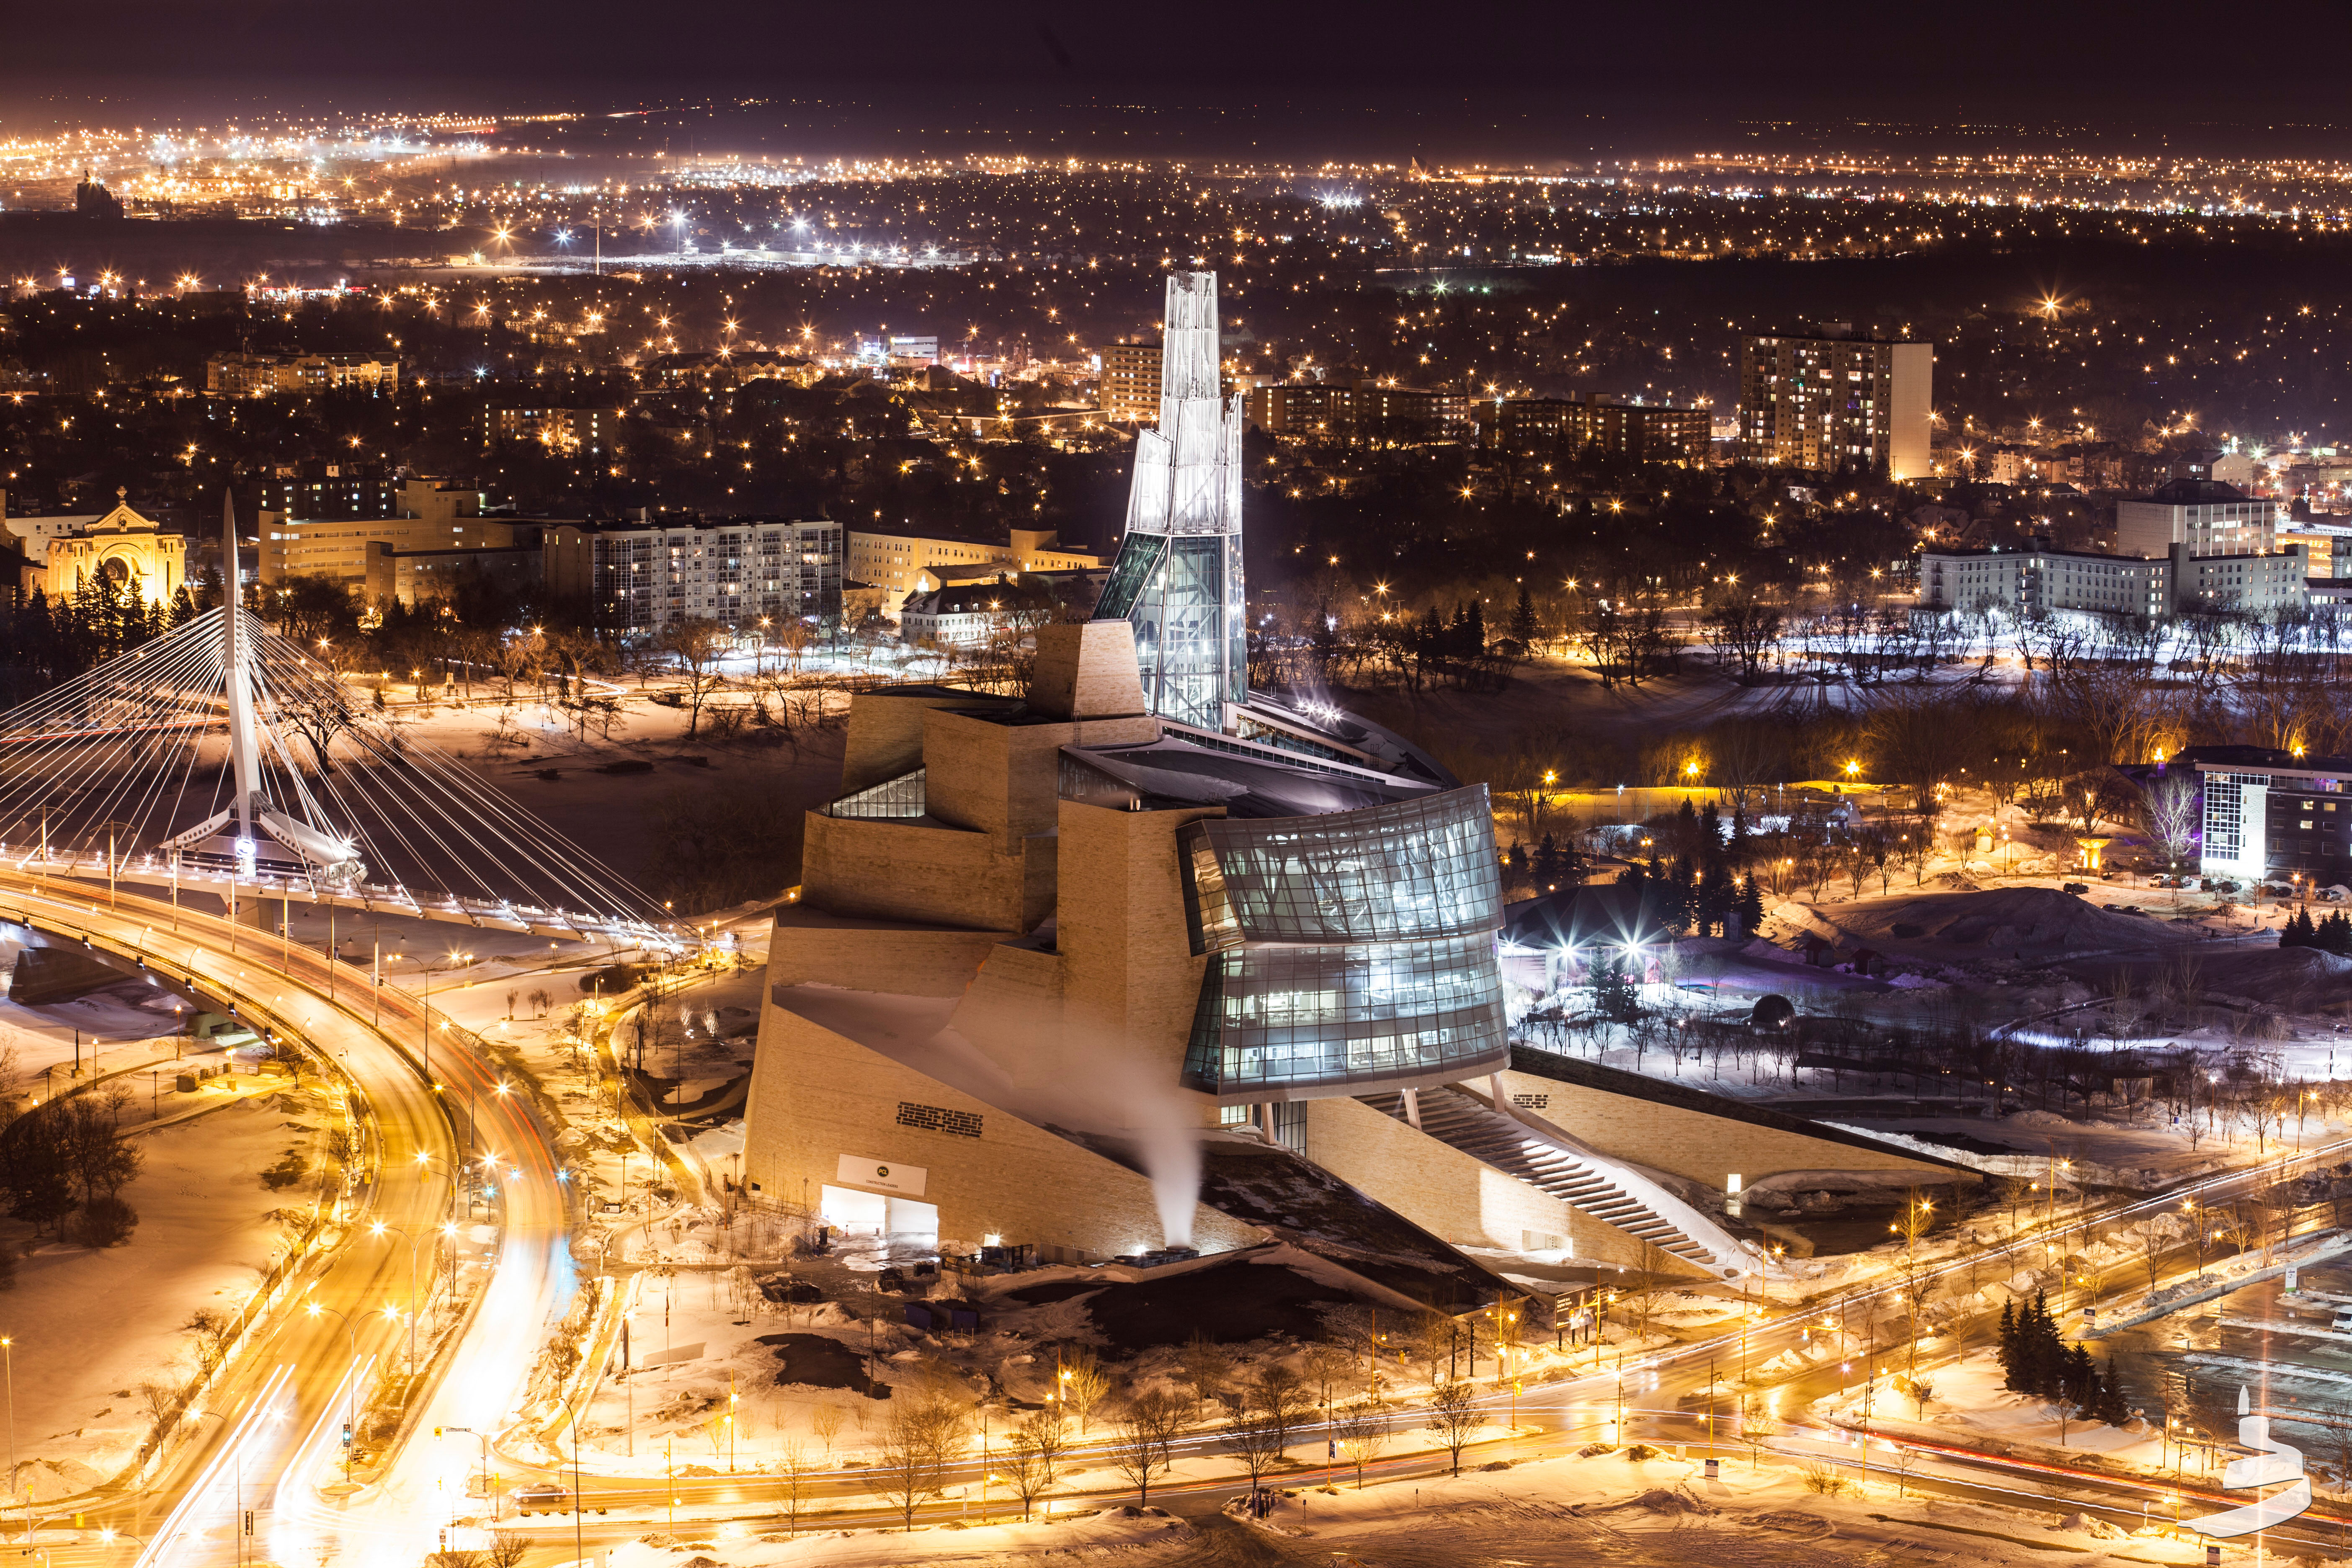 The Canadian Human Right Museum by night